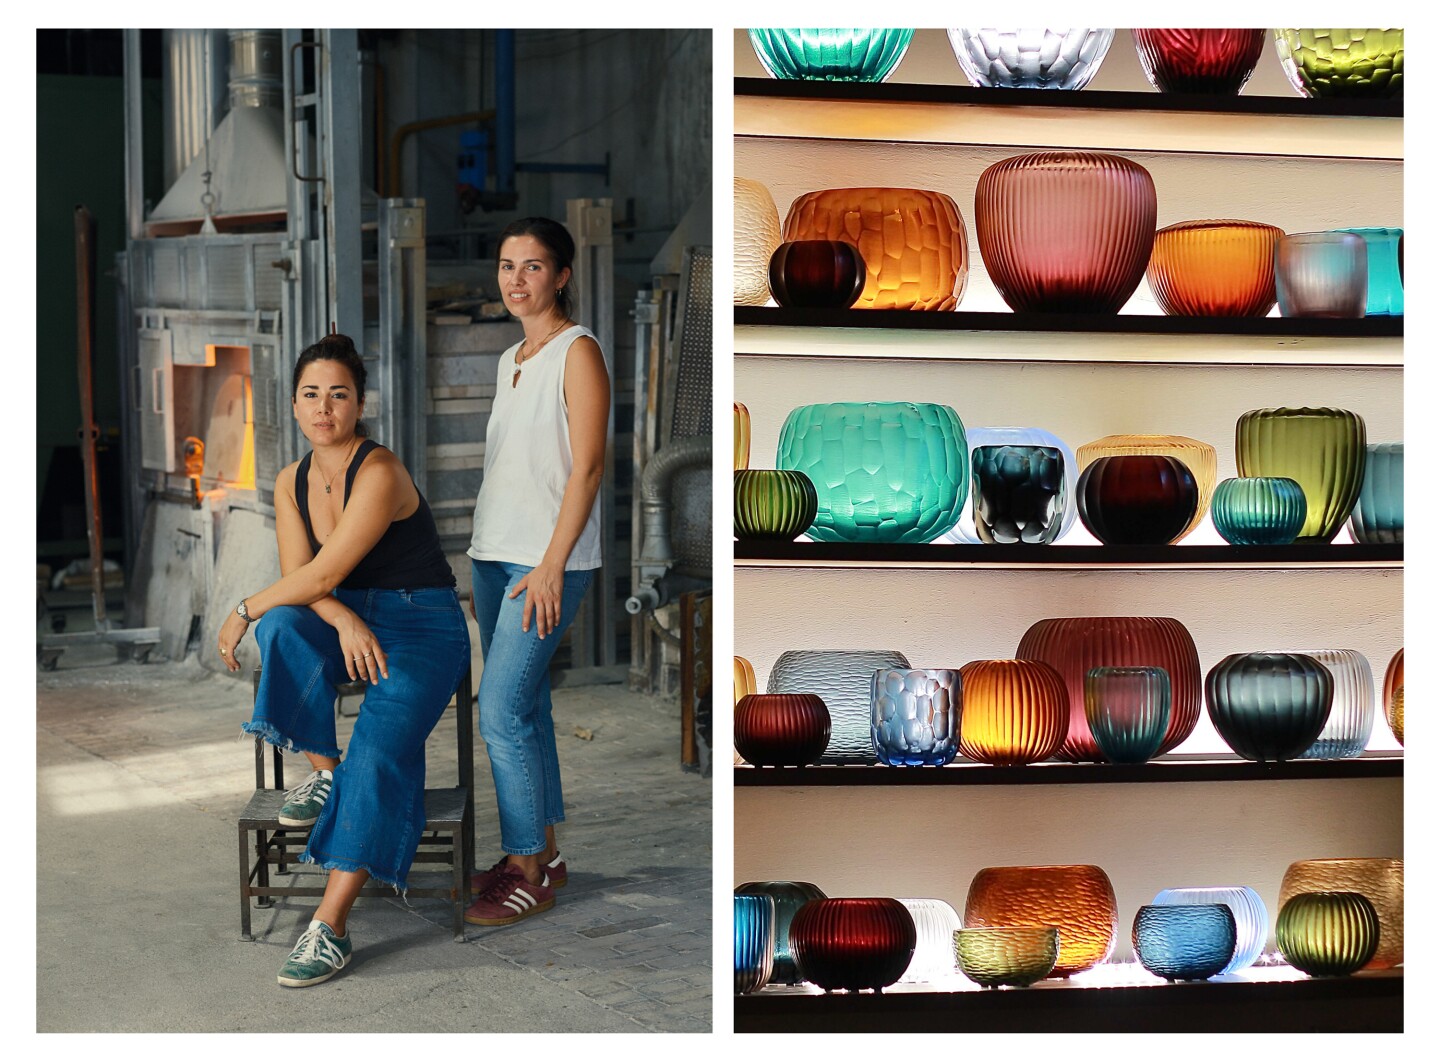 <a>Pick up unique vases and glassware at Micheluzzi Glass, which is run by sisters Elena and Margherita Micheluzzi.</a>